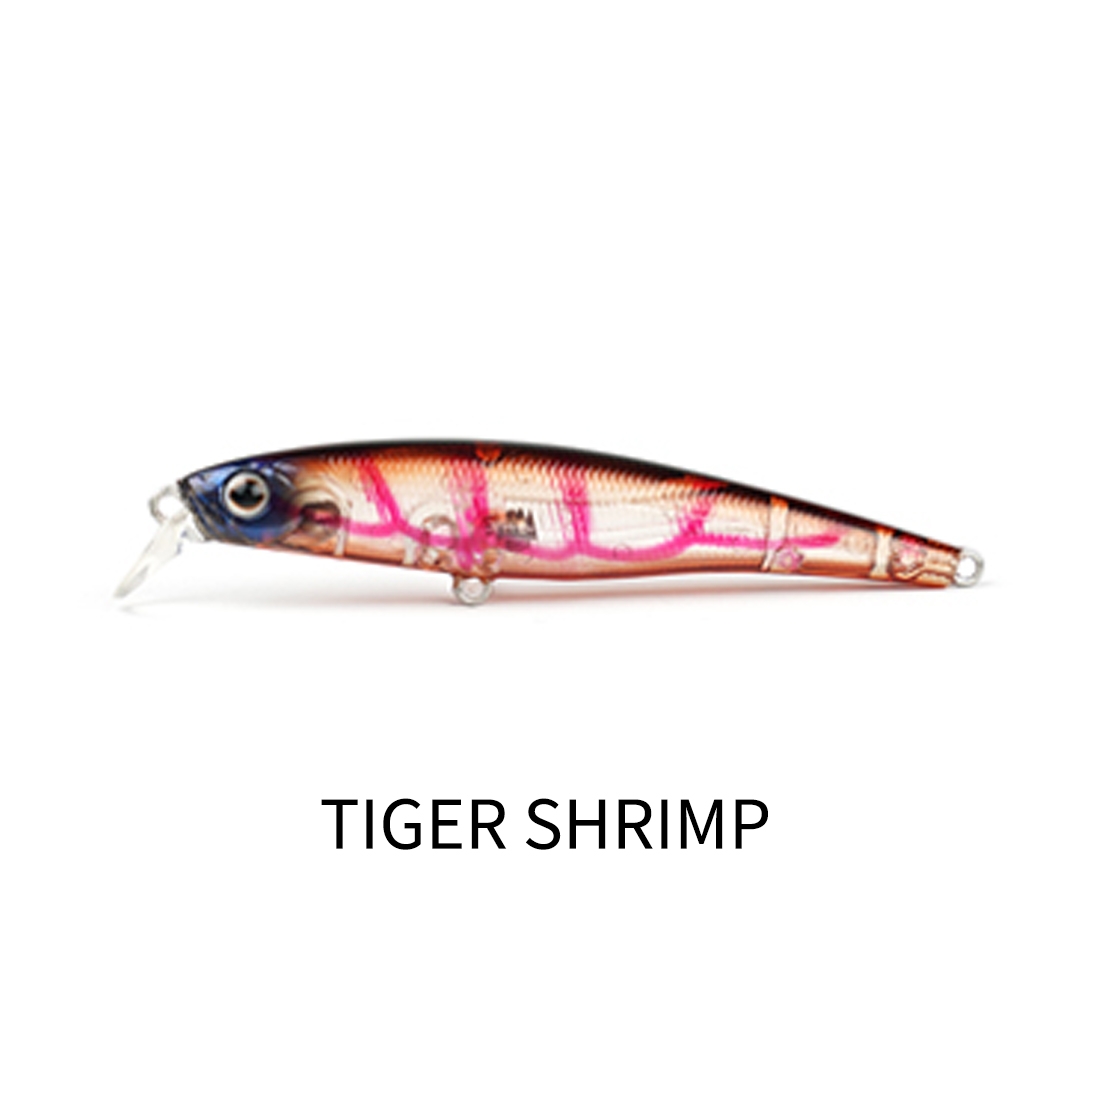 Pro Lure ST72 Minnow - Shallow (Emerald) – Trophy Trout Lures and Fly  Fishing